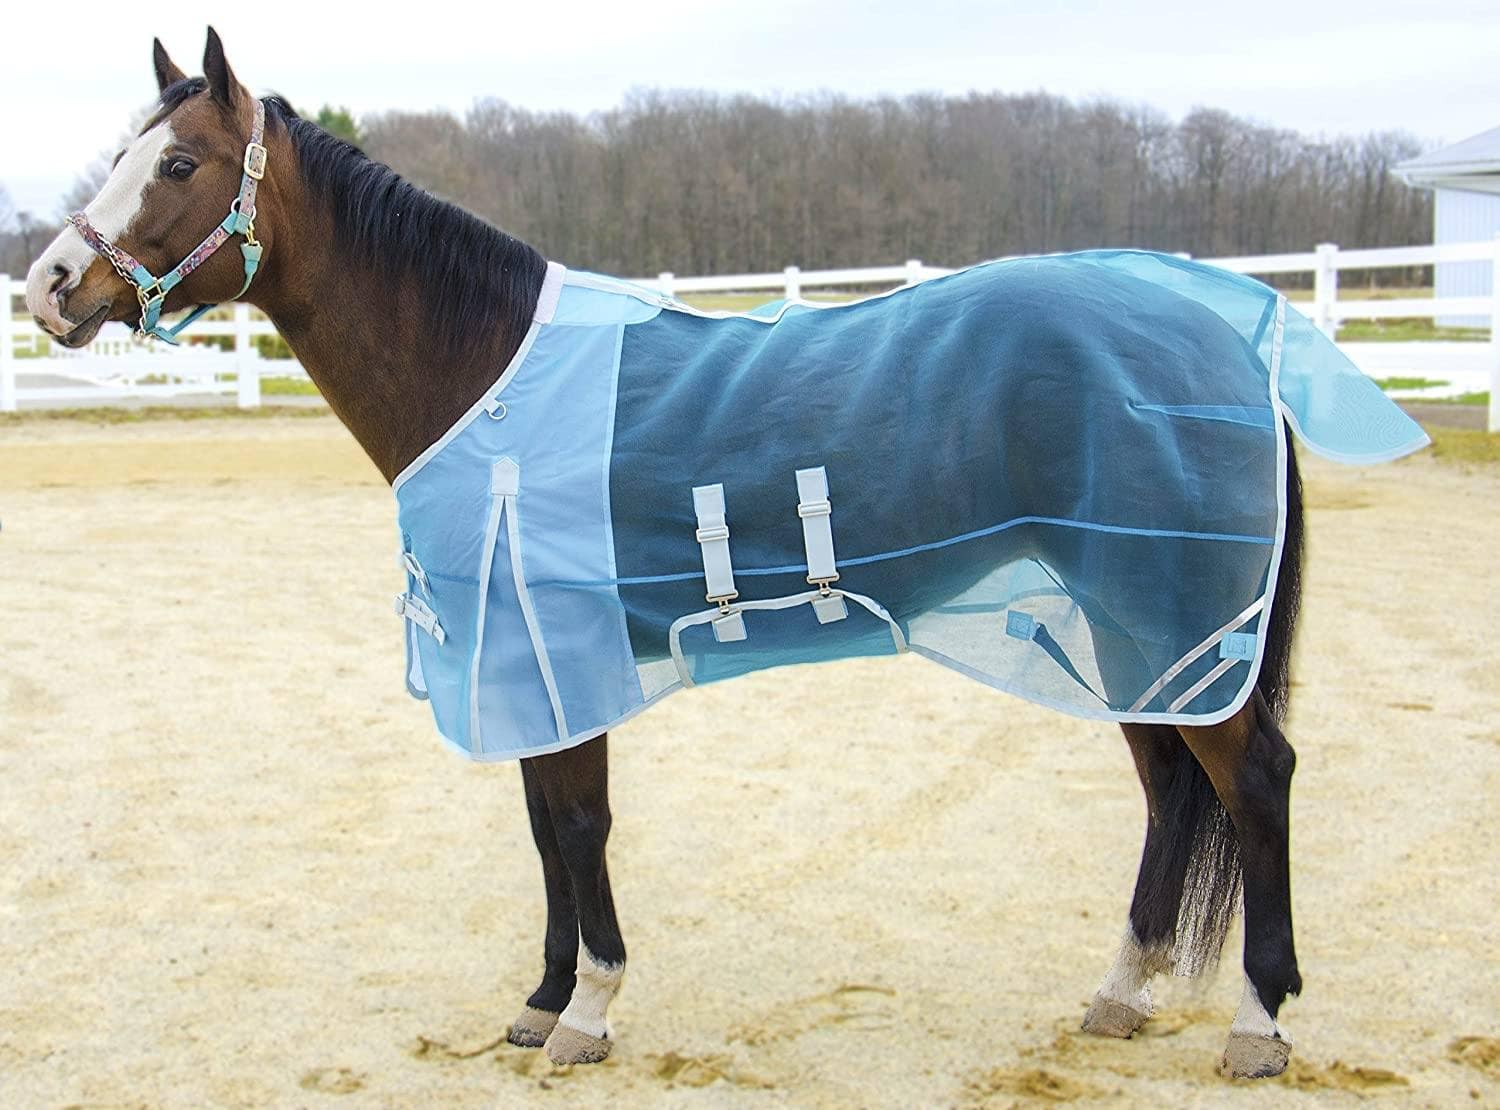 Do fly sheets keep horses cool?